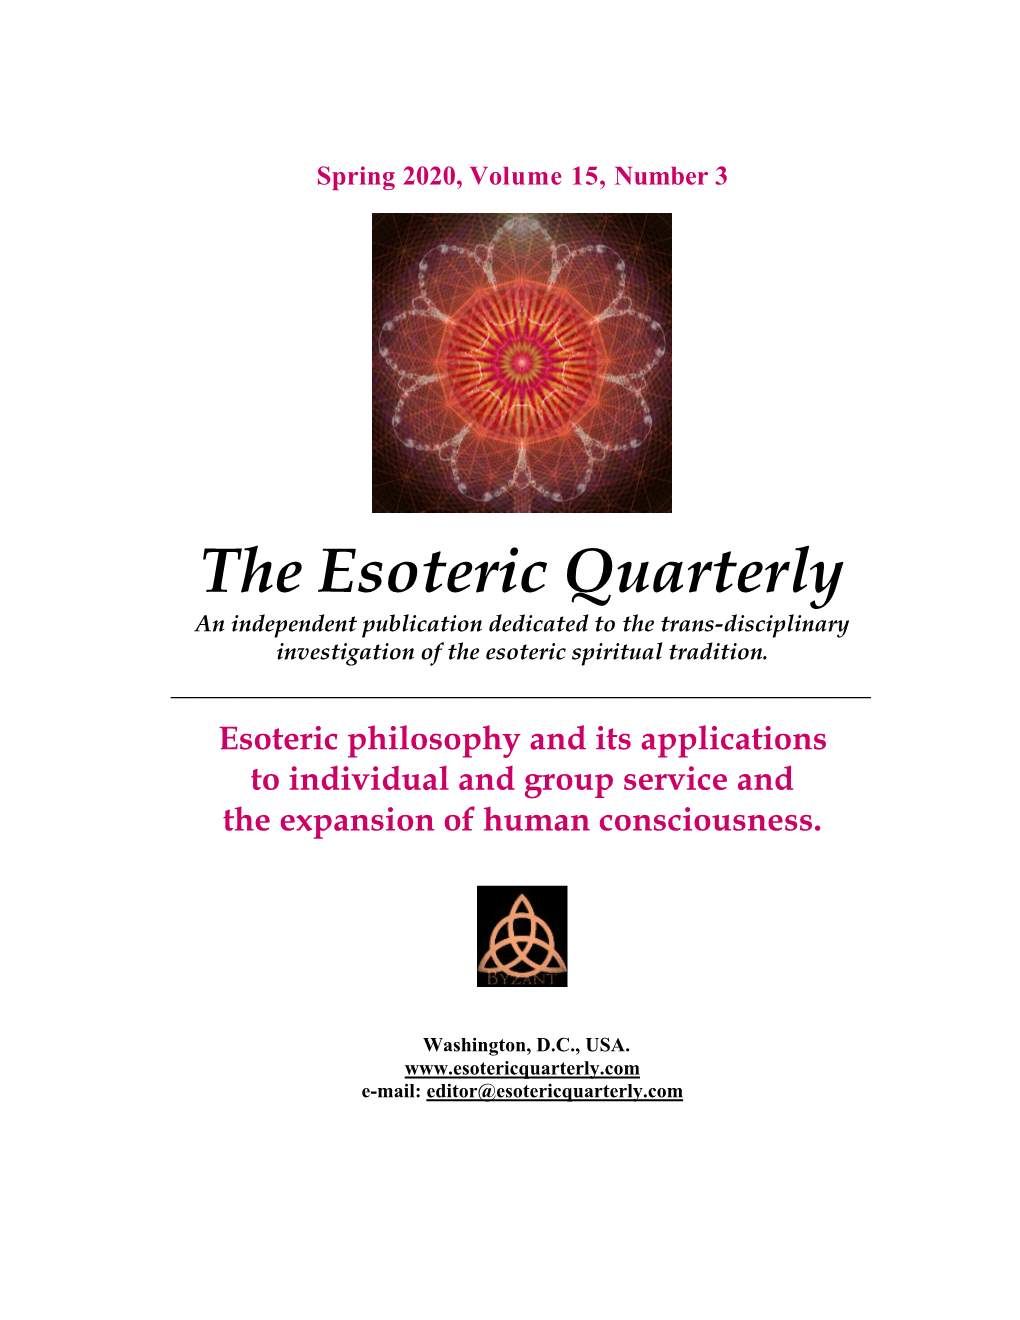 The Esoteric Quarterly an Independent Publication Dedicated to the Trans-Disciplinary Investigation of the Esoteric Spiritual Tradition